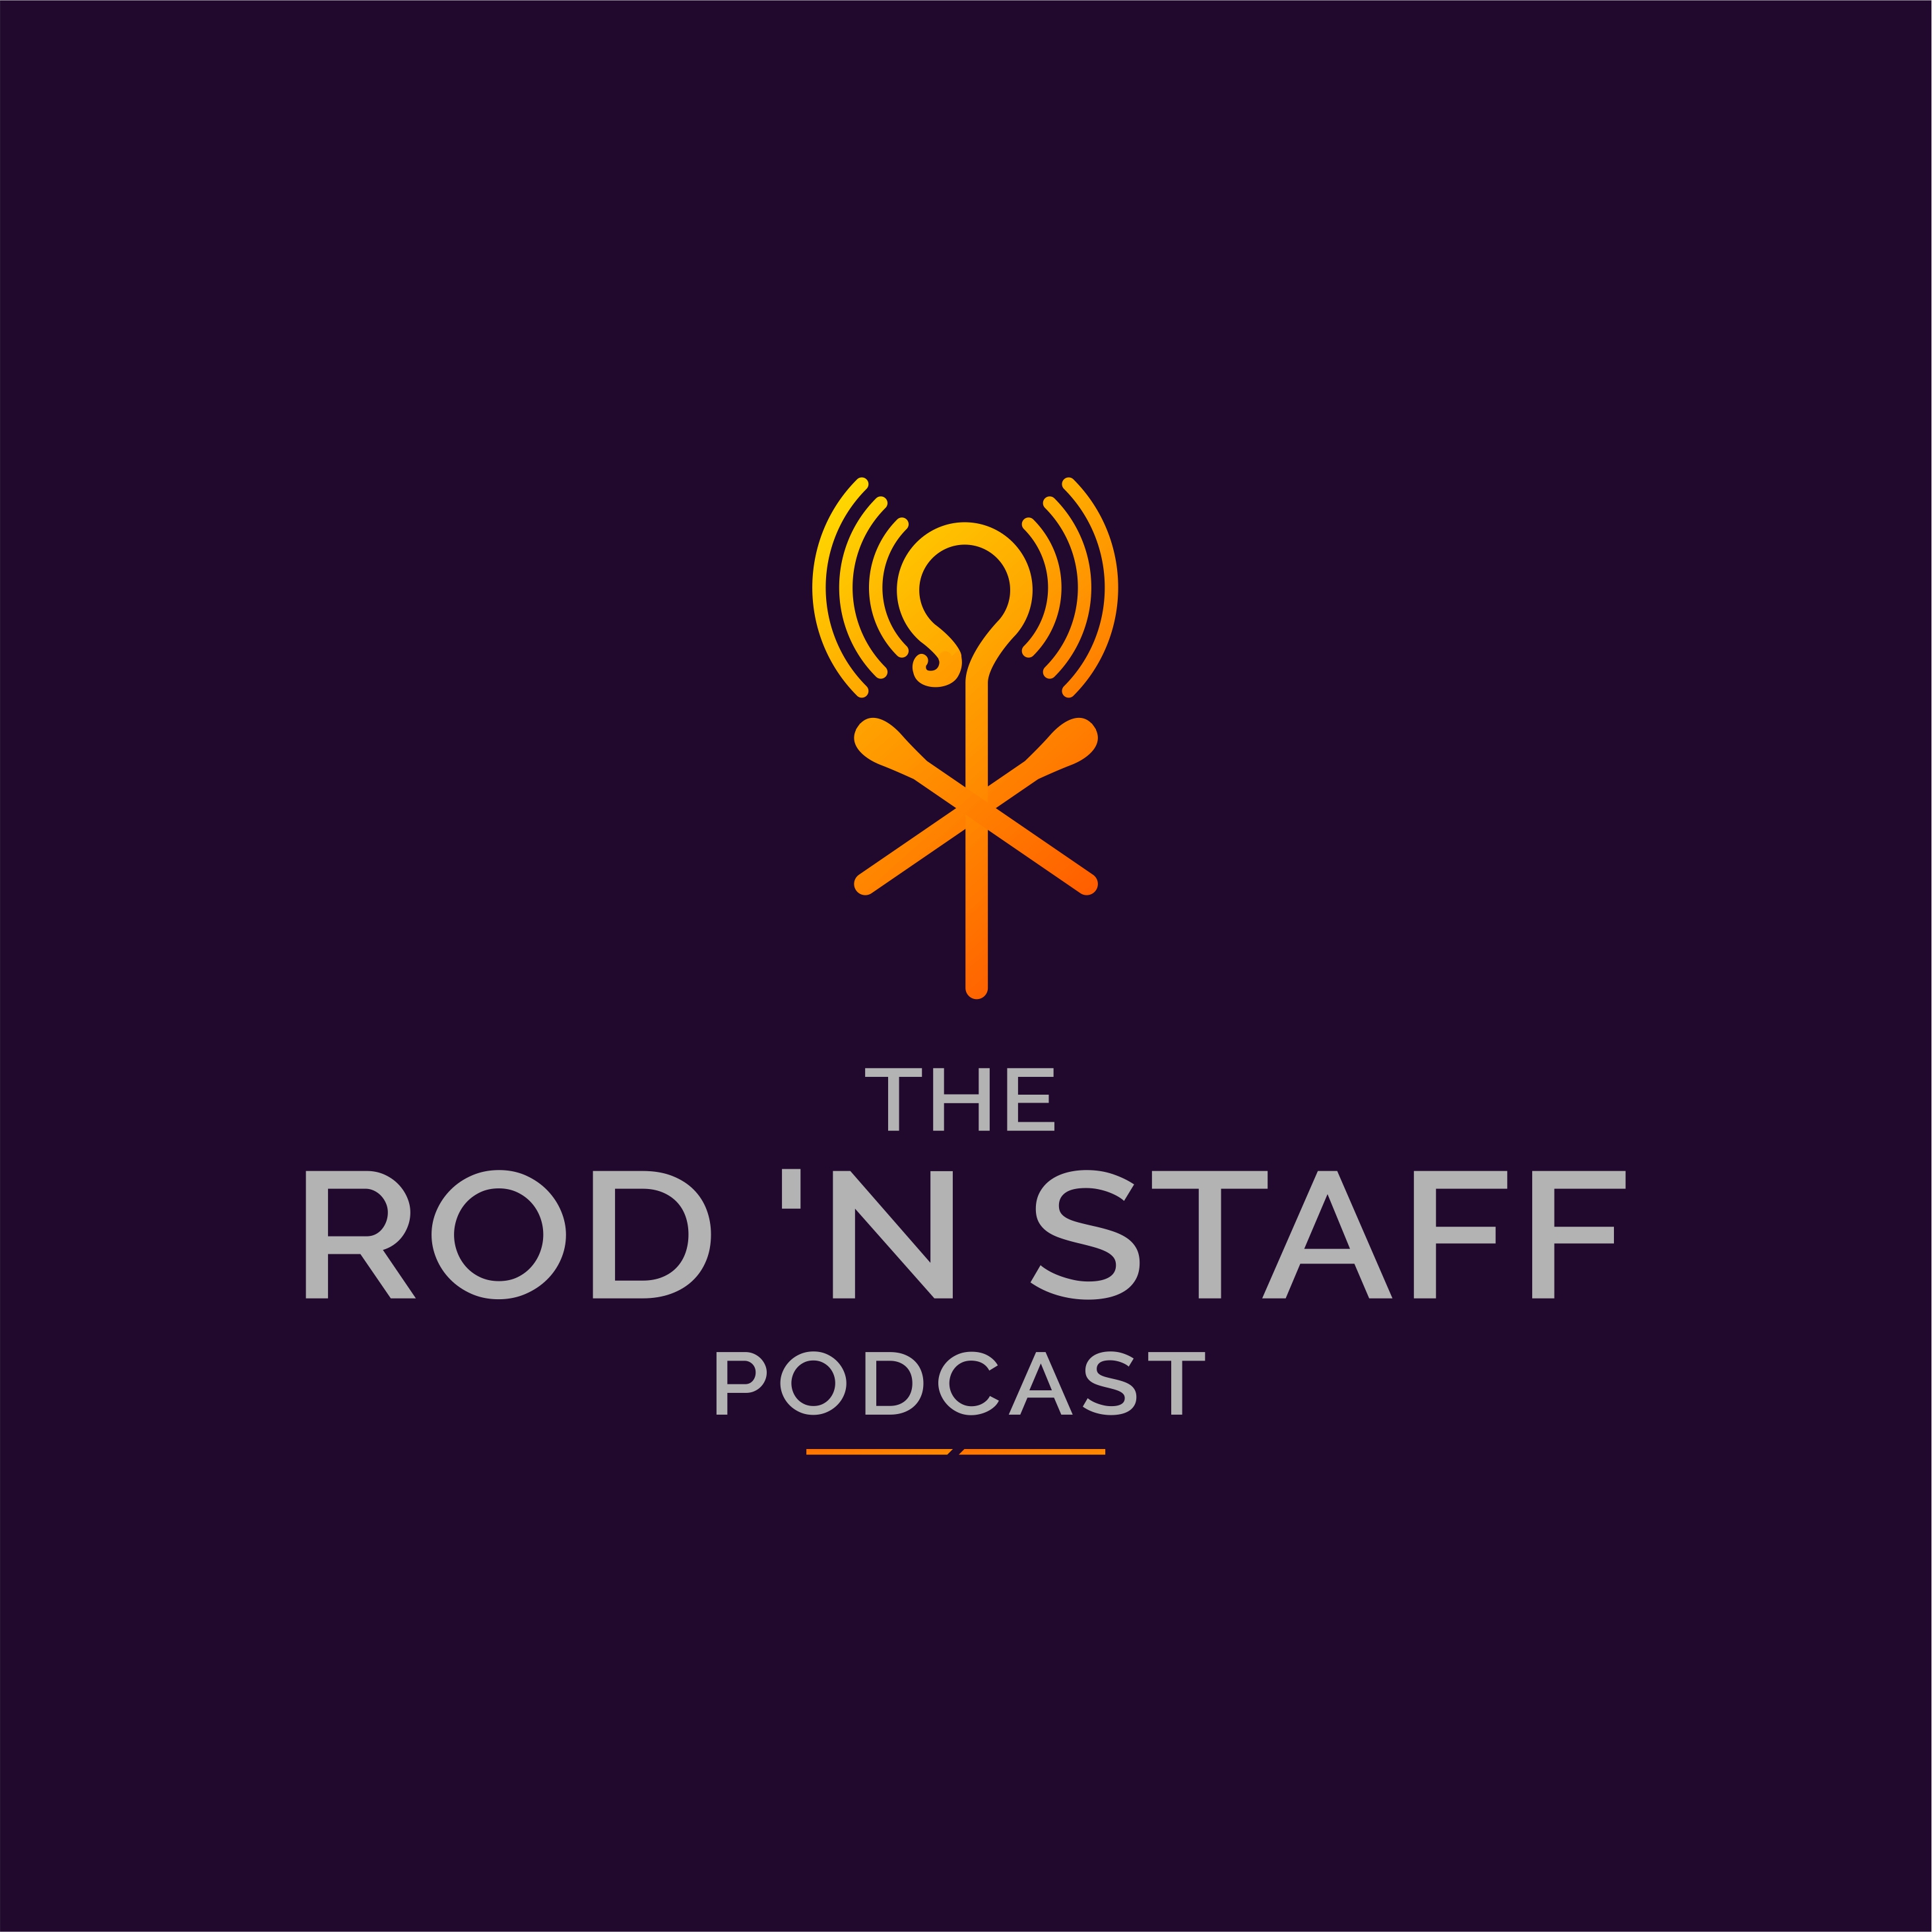 The Rod 'n Staff Podcast